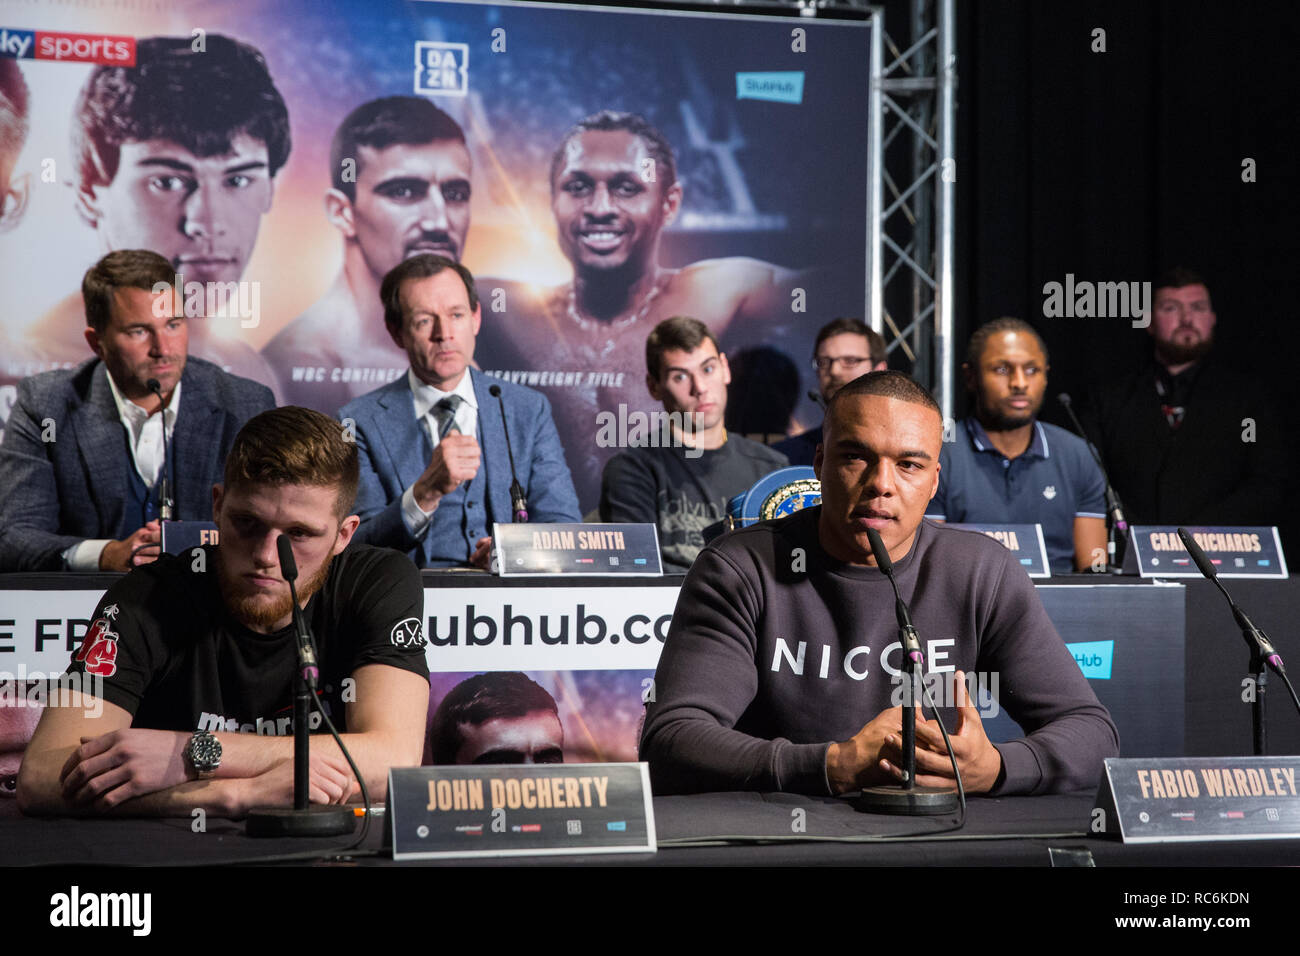 London, UK. 14th January, 2019. Ipswich heavyweight prospect Fabio Wardley speaks at the press conference for a Matchroom Boxing card at the 02 on 2nd February headed by a European Super-Welterweight Championship fight between Sergio Garcia and Ted Cheeseman. Credit: Mark Kerrison/Alamy Live News Stock Photo